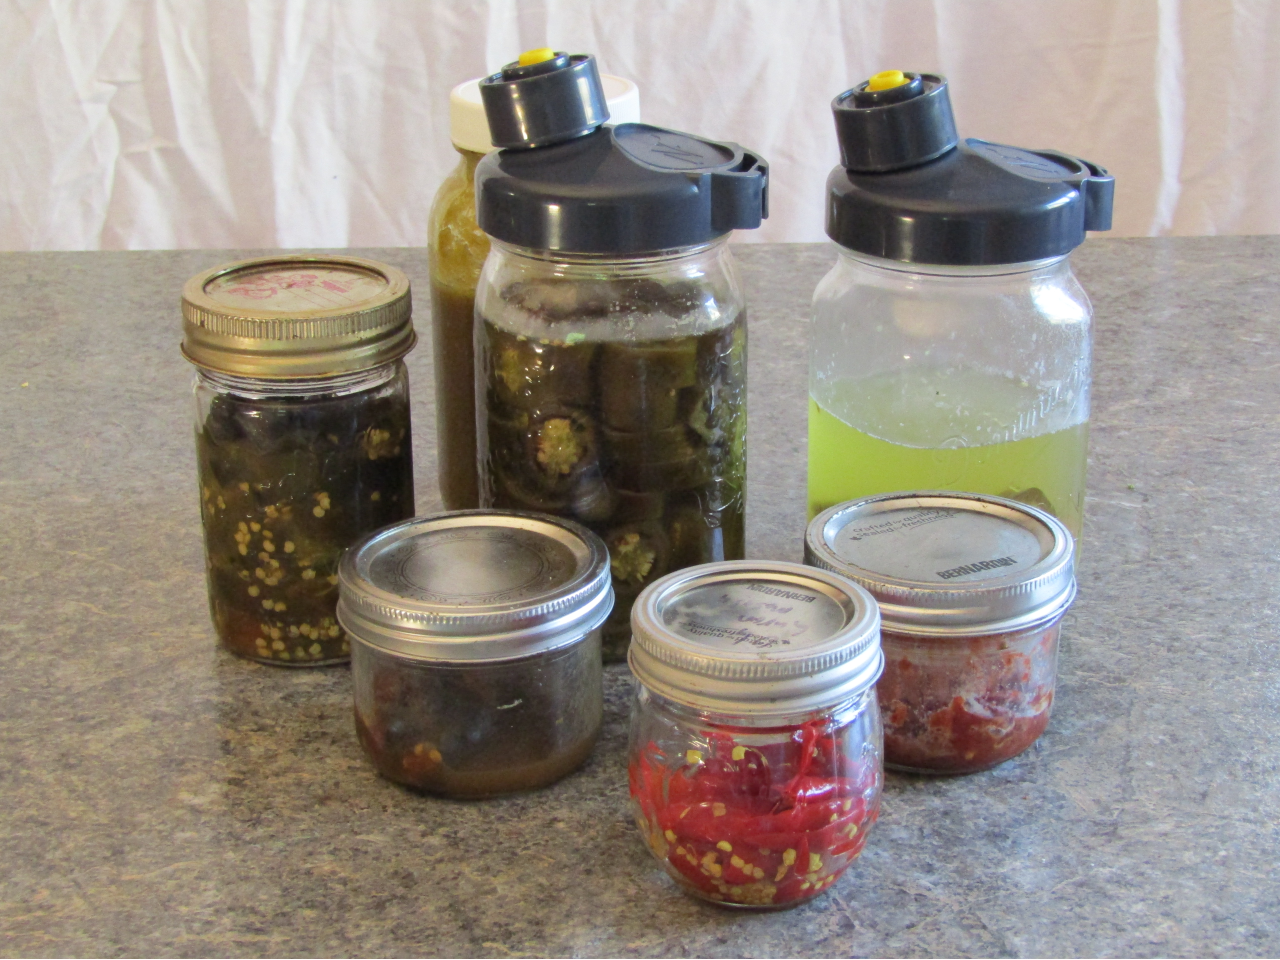 Six jars of various sizes holding different types of fermented hot peppers